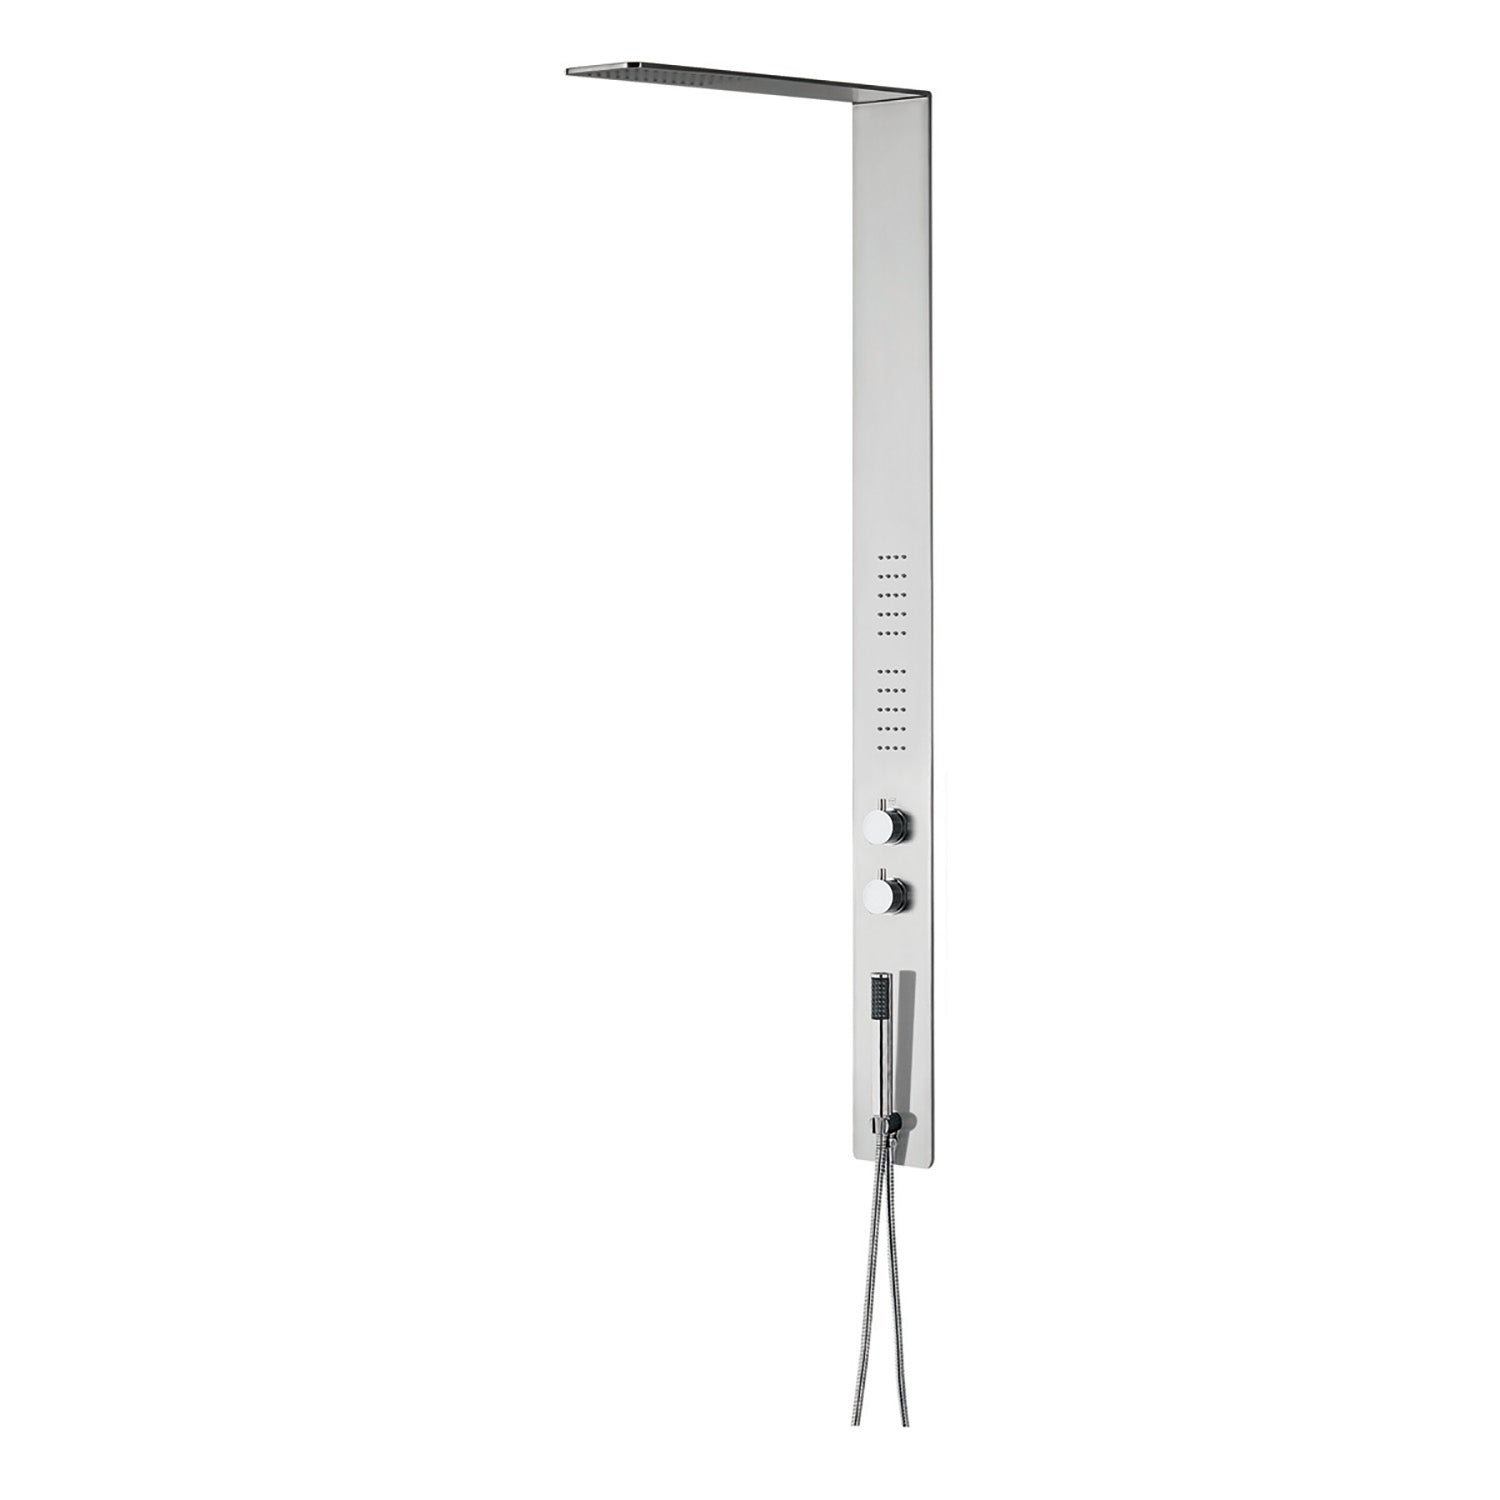 DAX Brushed Stainless Steel Shower Panel With Pressure Balance Valve (DAX-034-2)